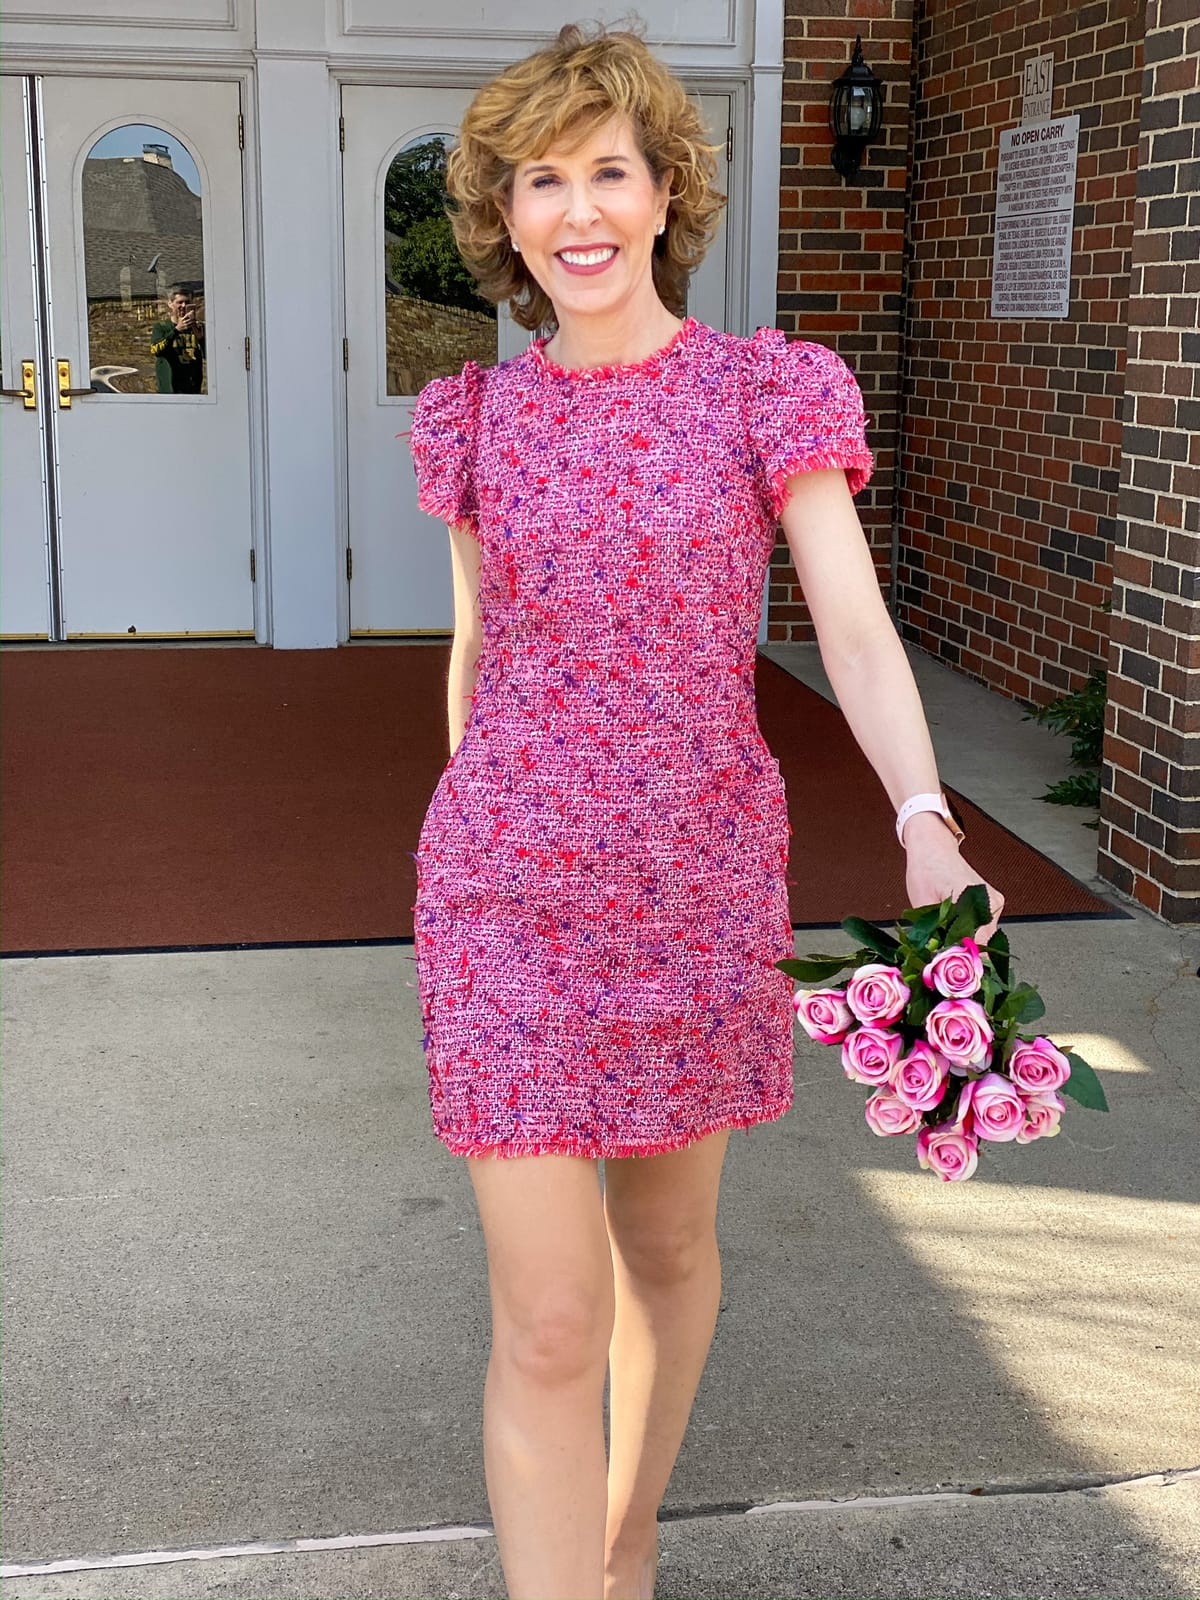 woman in pink tweed dress holding pink roses